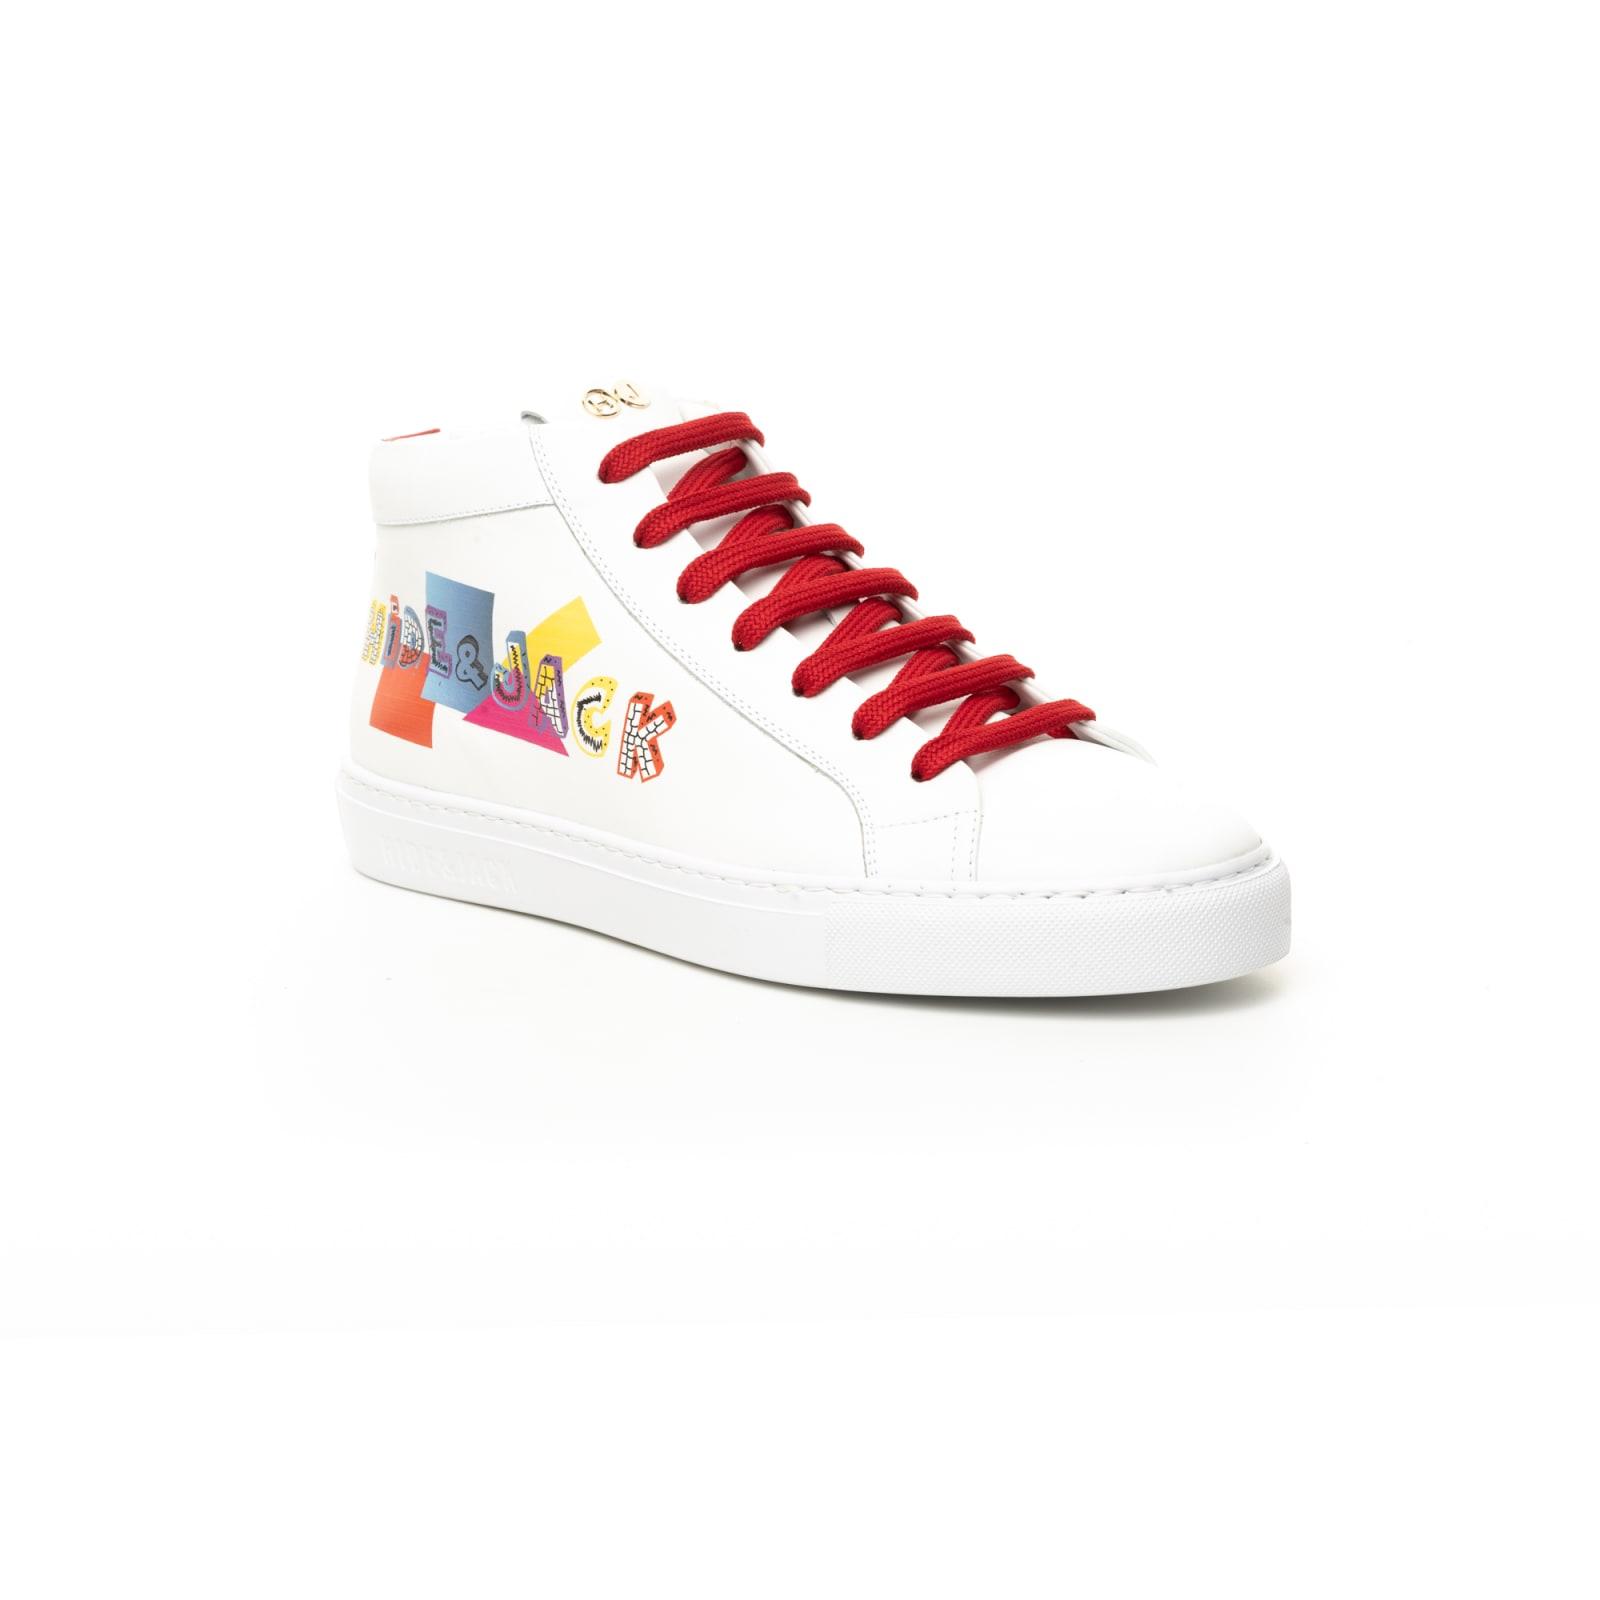 HIDE & JACK High Top Sneaker - Tuscany Murales White White in Red | Lyst